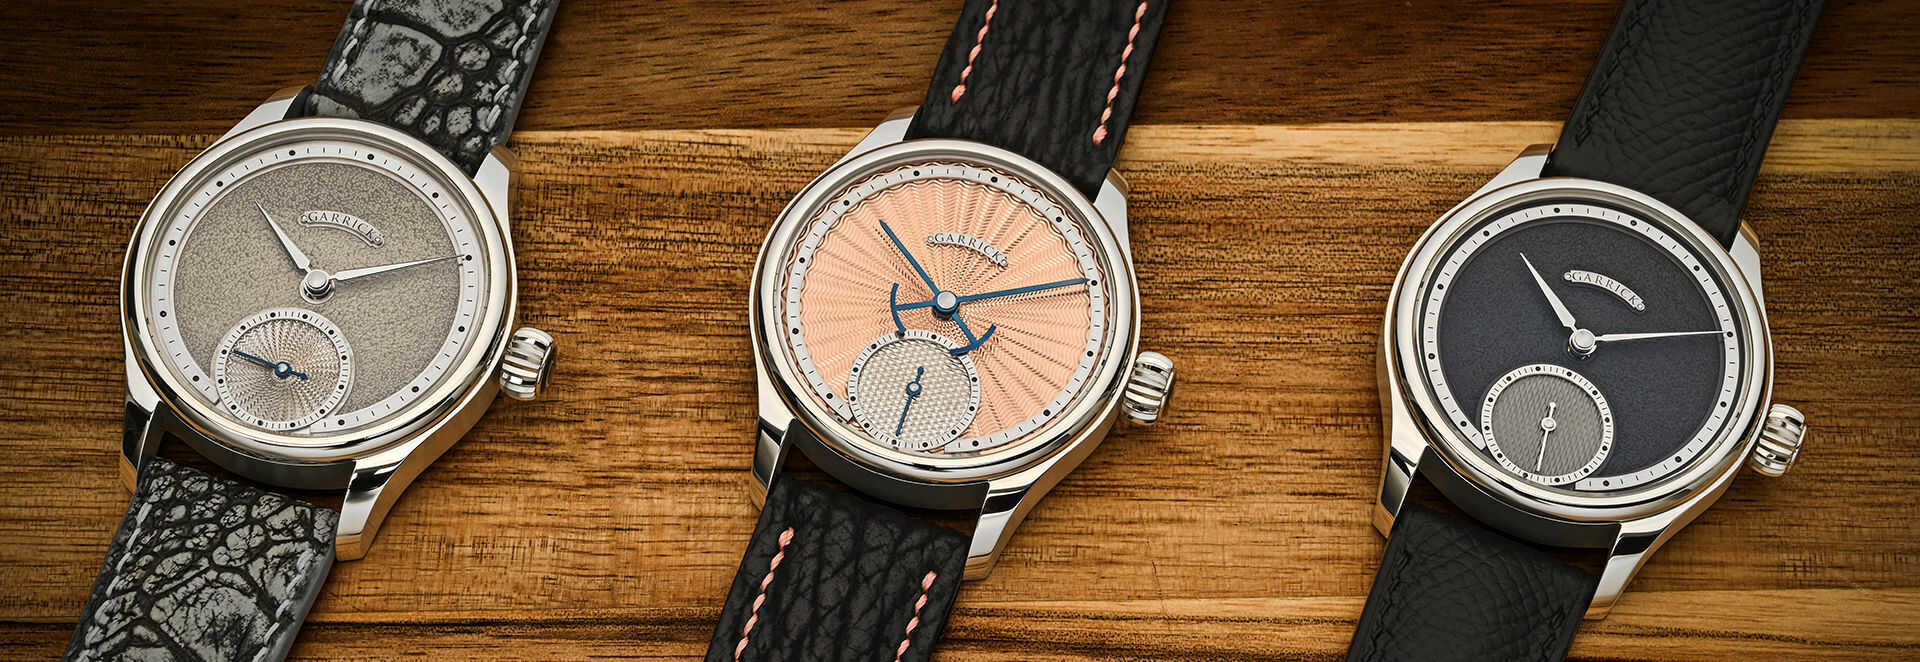 British made S6 wristwatch with guilloche dial by Garrick